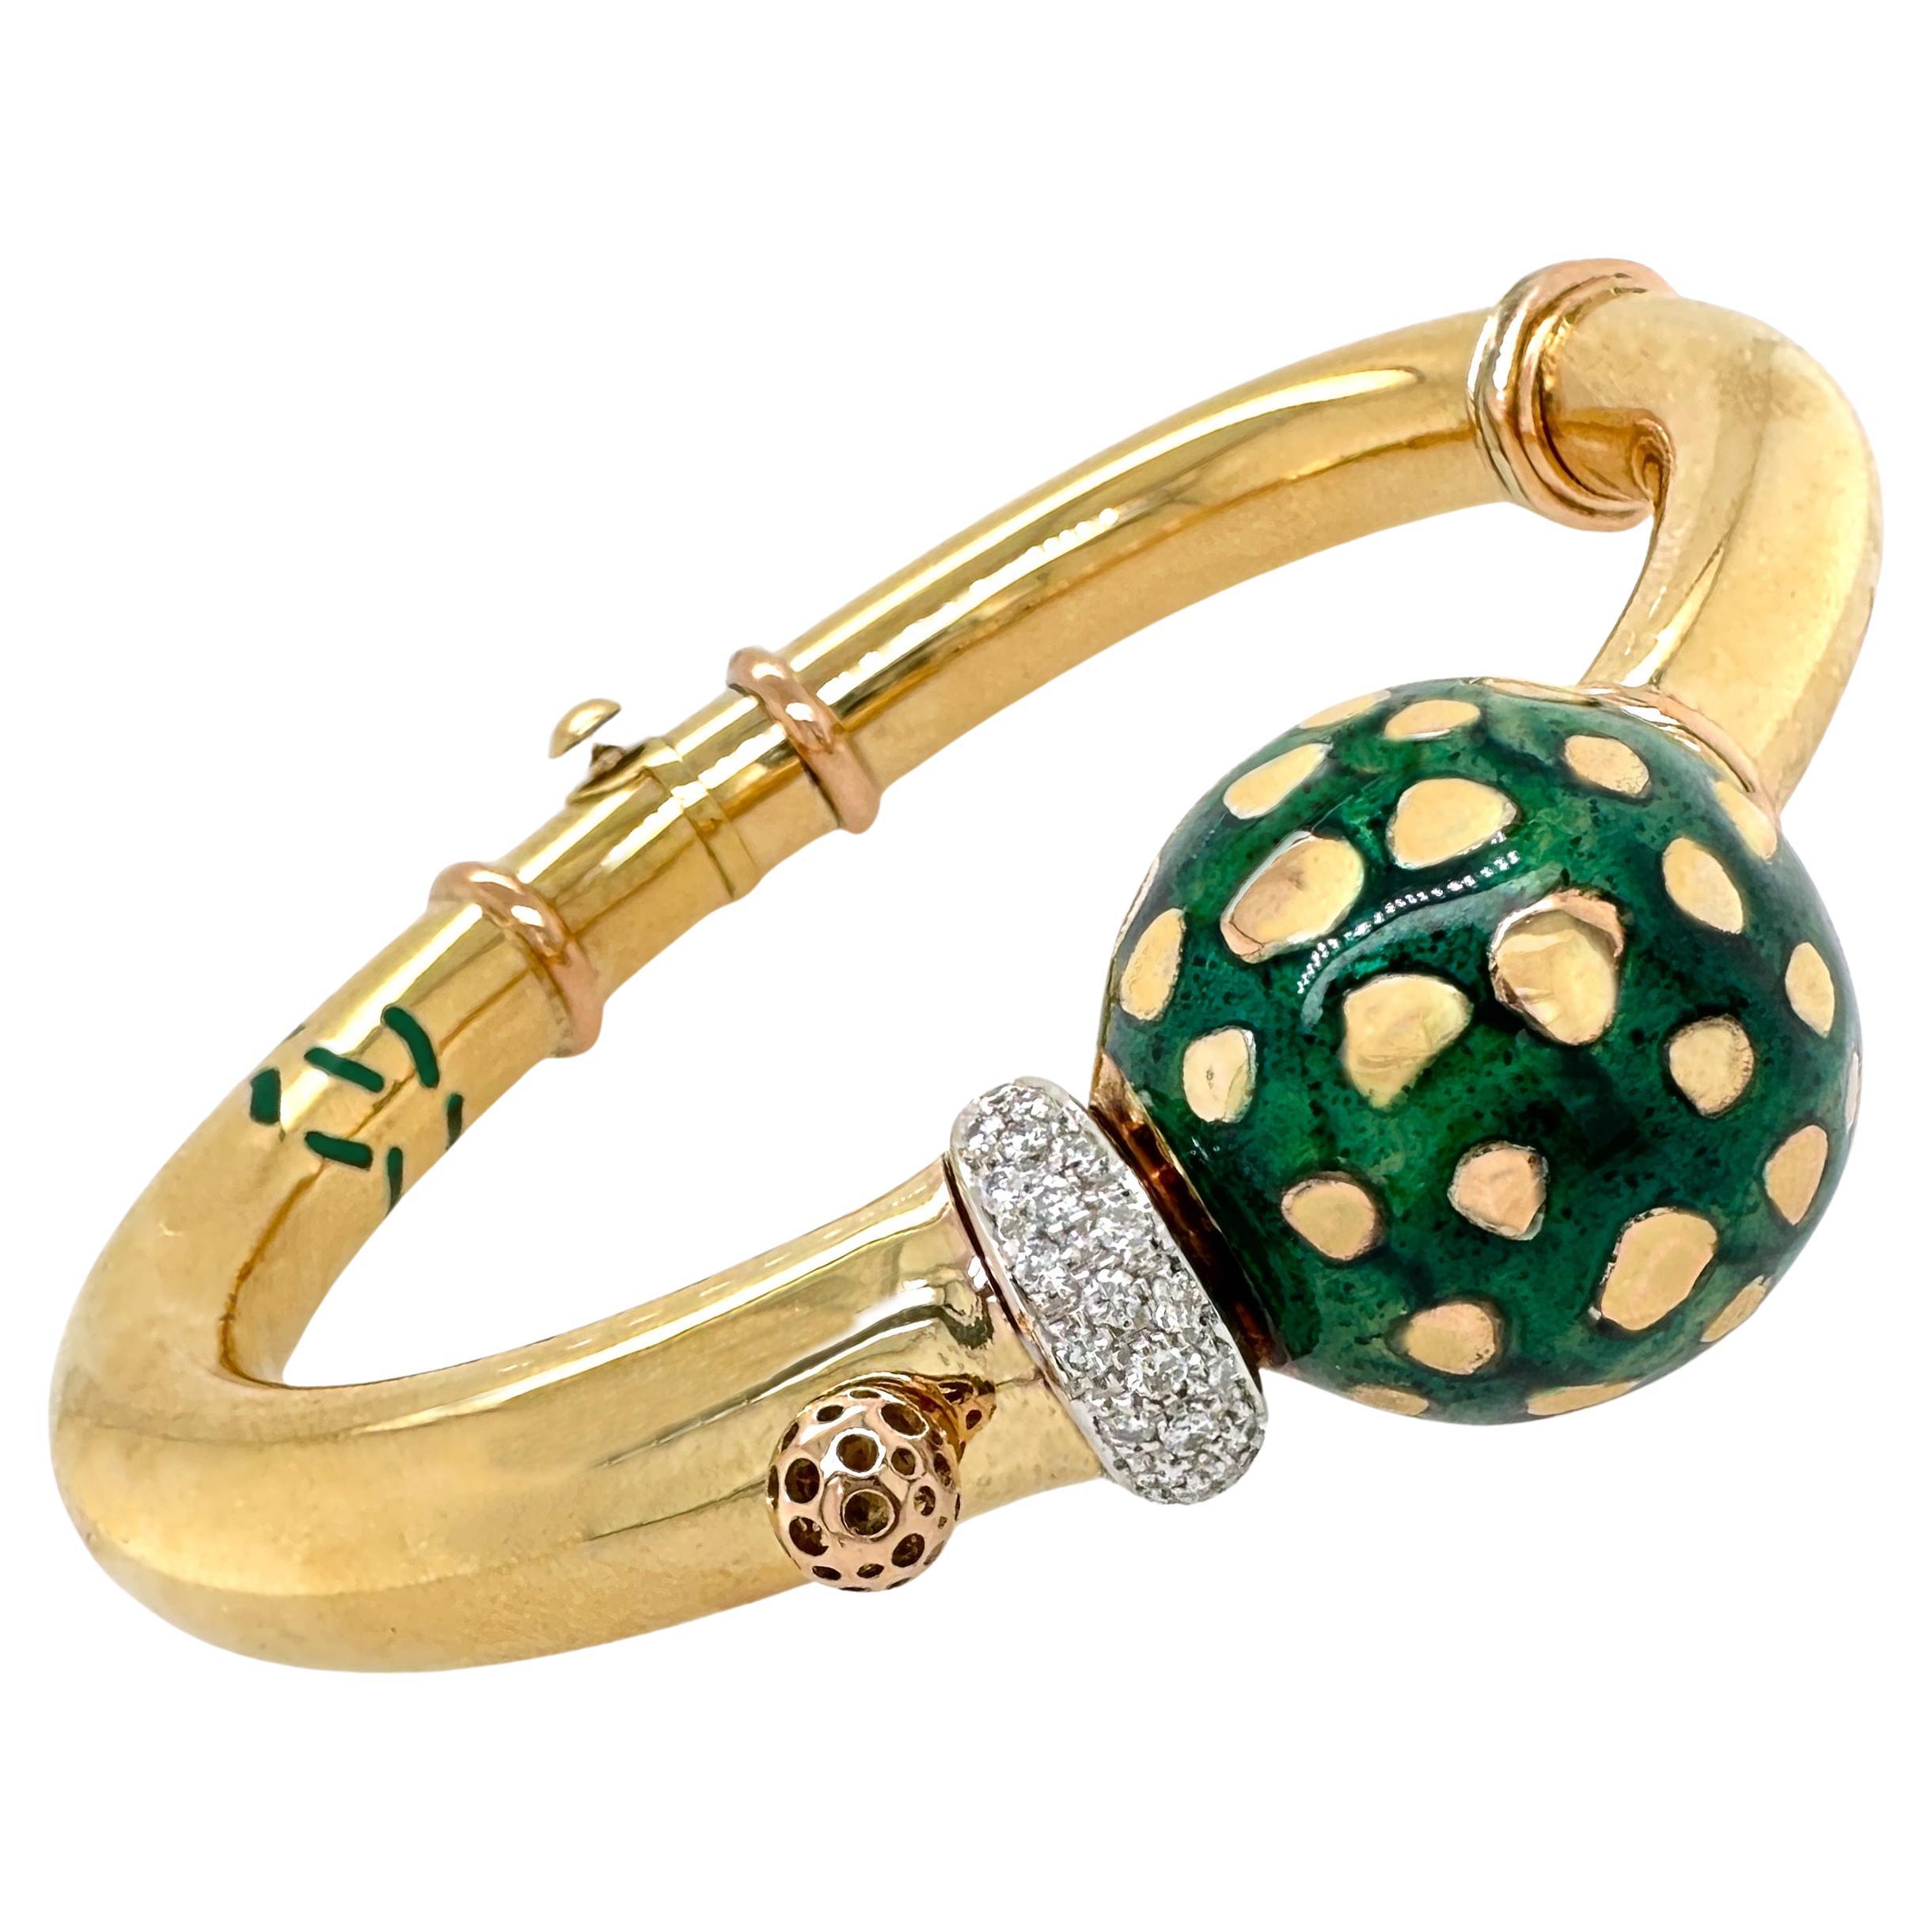 La Nouvelle Bague Bangle with Diamonds and Enamel Ball in 18K Gold & Sterling